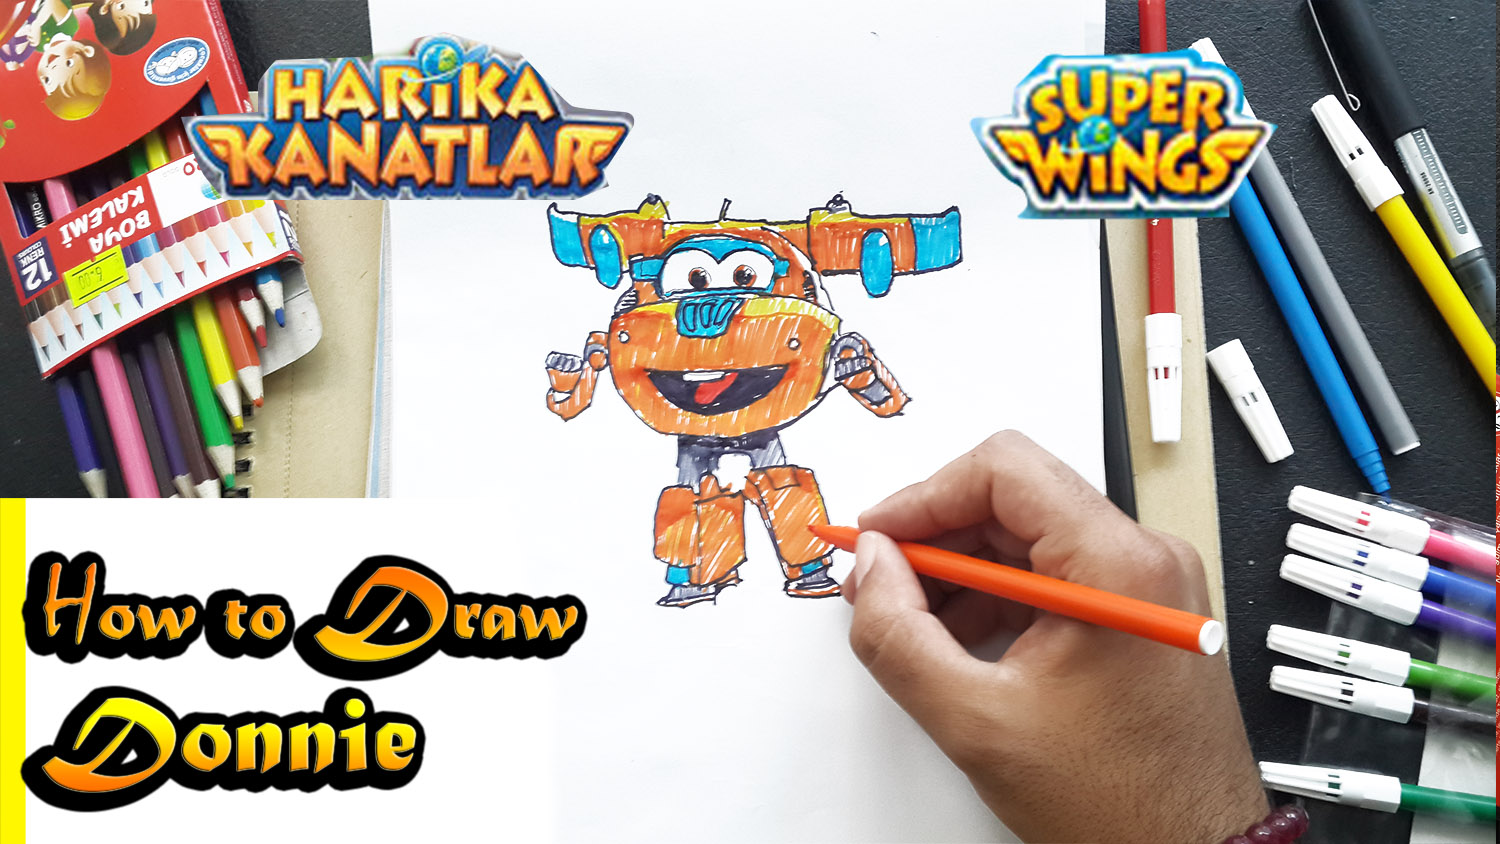 How to draw superwings draw step by step tutorial funny art basic kids draw lets art do